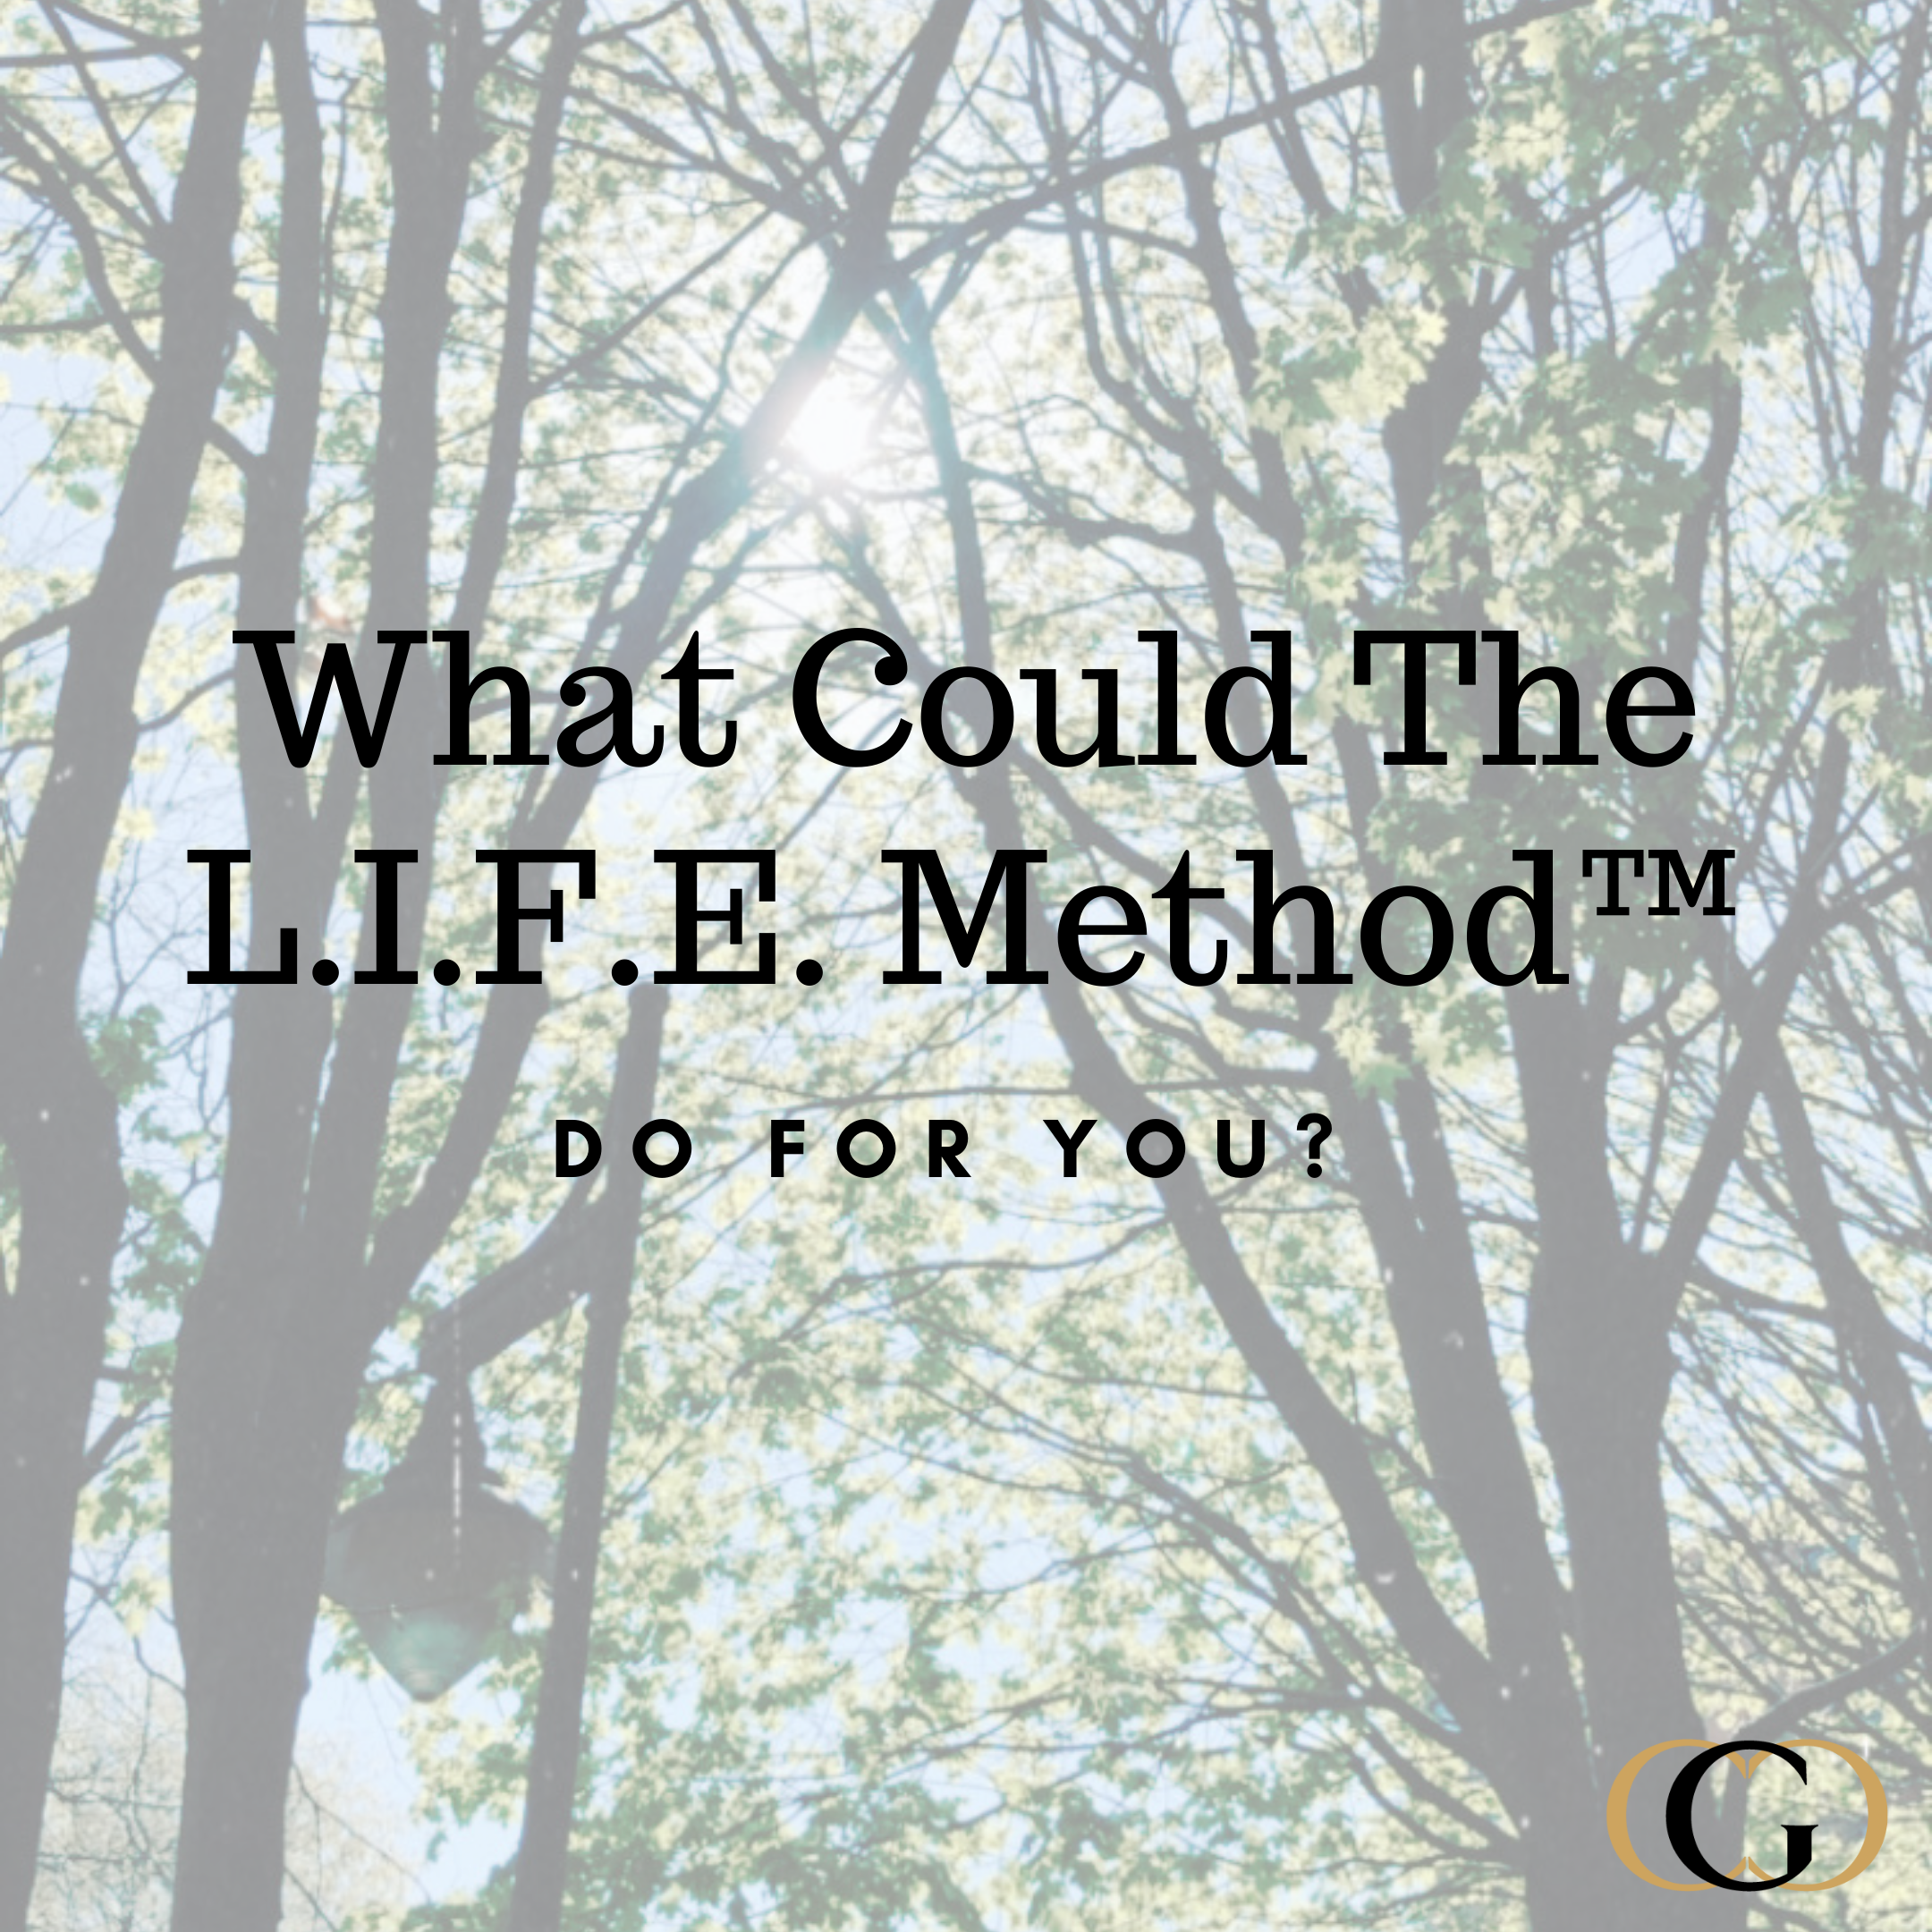 What Could The L.I.F.E. Method™ Do For You?